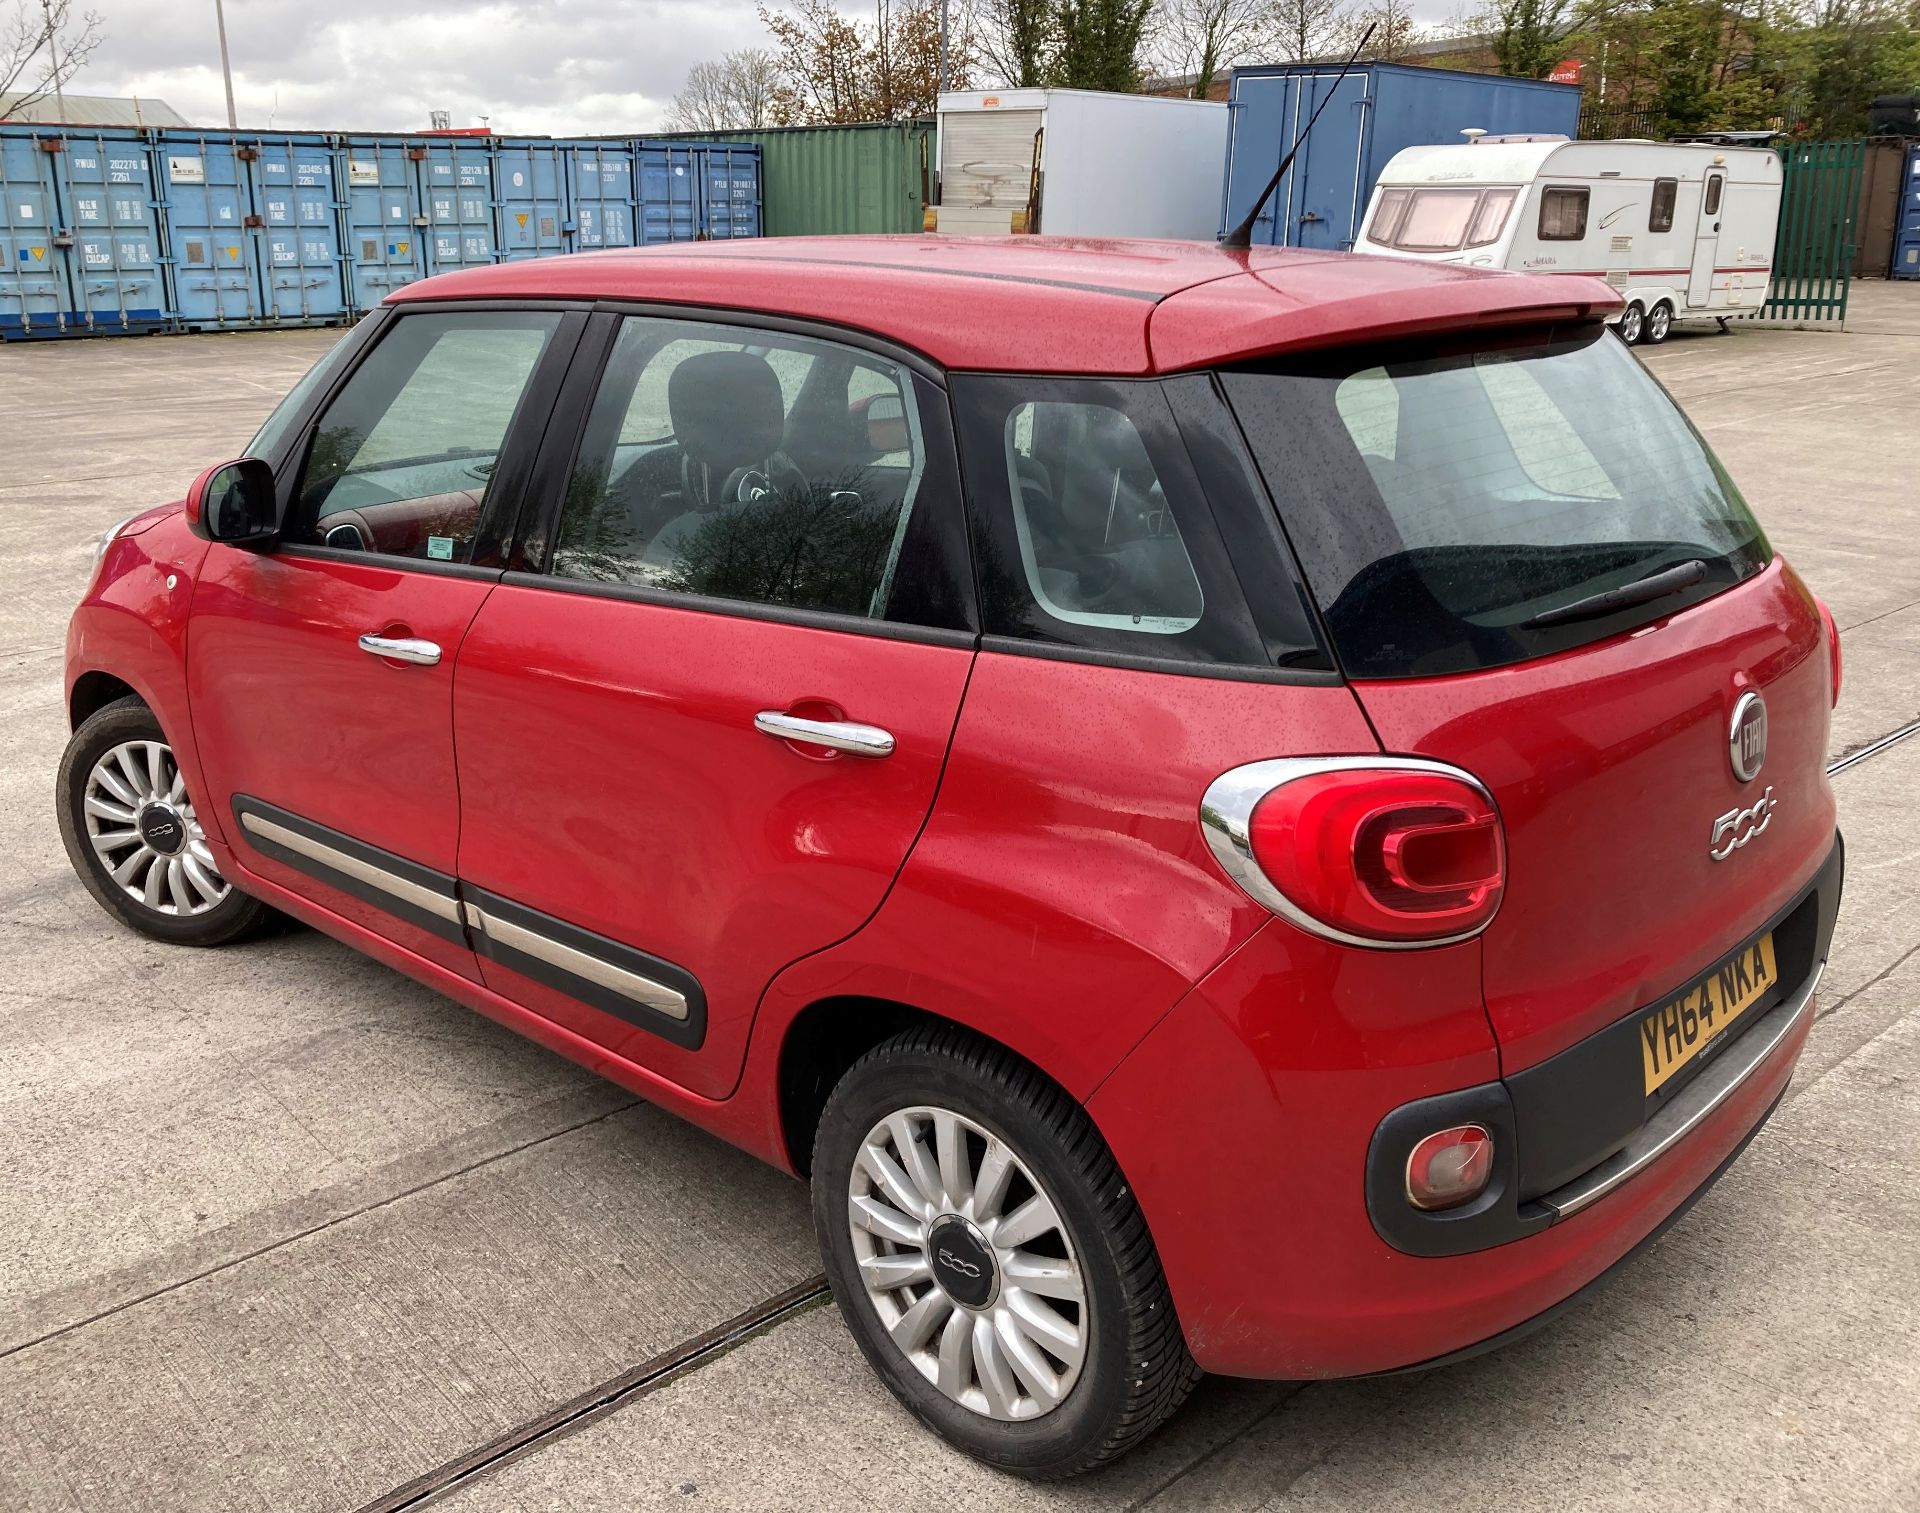 FIAT 500L POP STAR MULTI-JET 1.2 MPV - DIESEL - RED. On the instructions of: A retained client. - Bild 7 aus 16